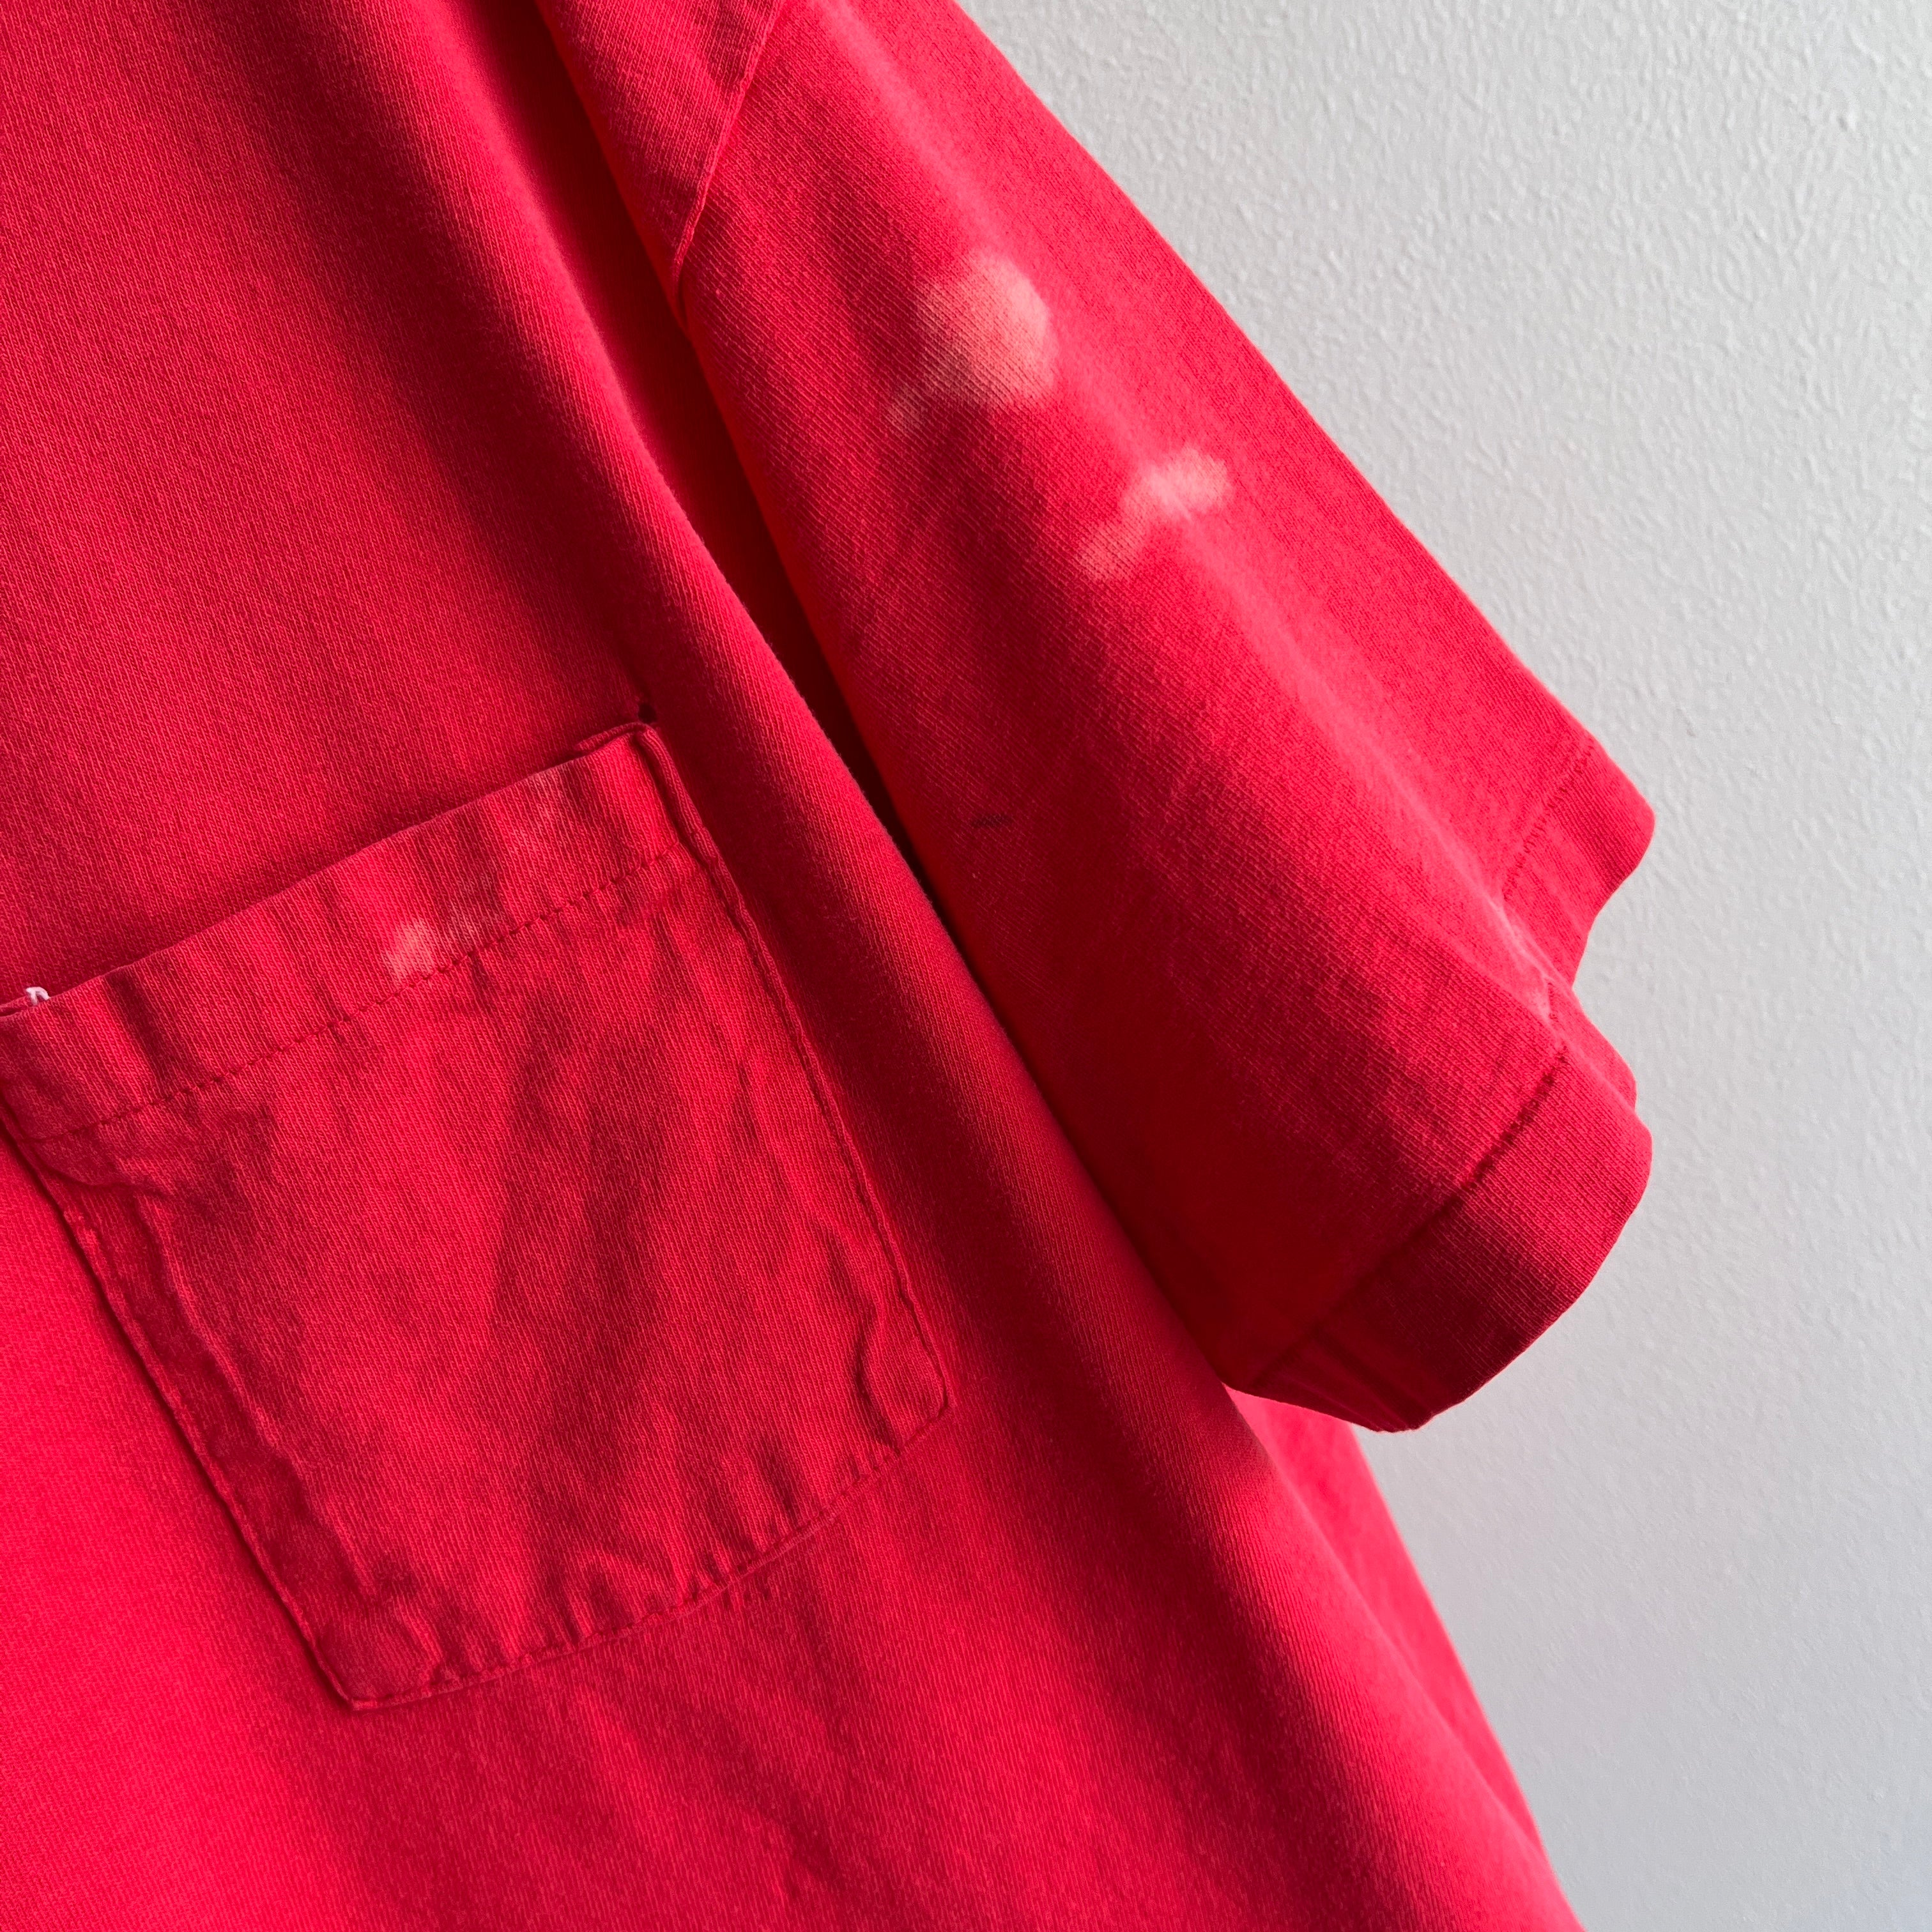 1990s Nicely Bleach Stained Selvedge Red Cotton Pocket T-Shirt